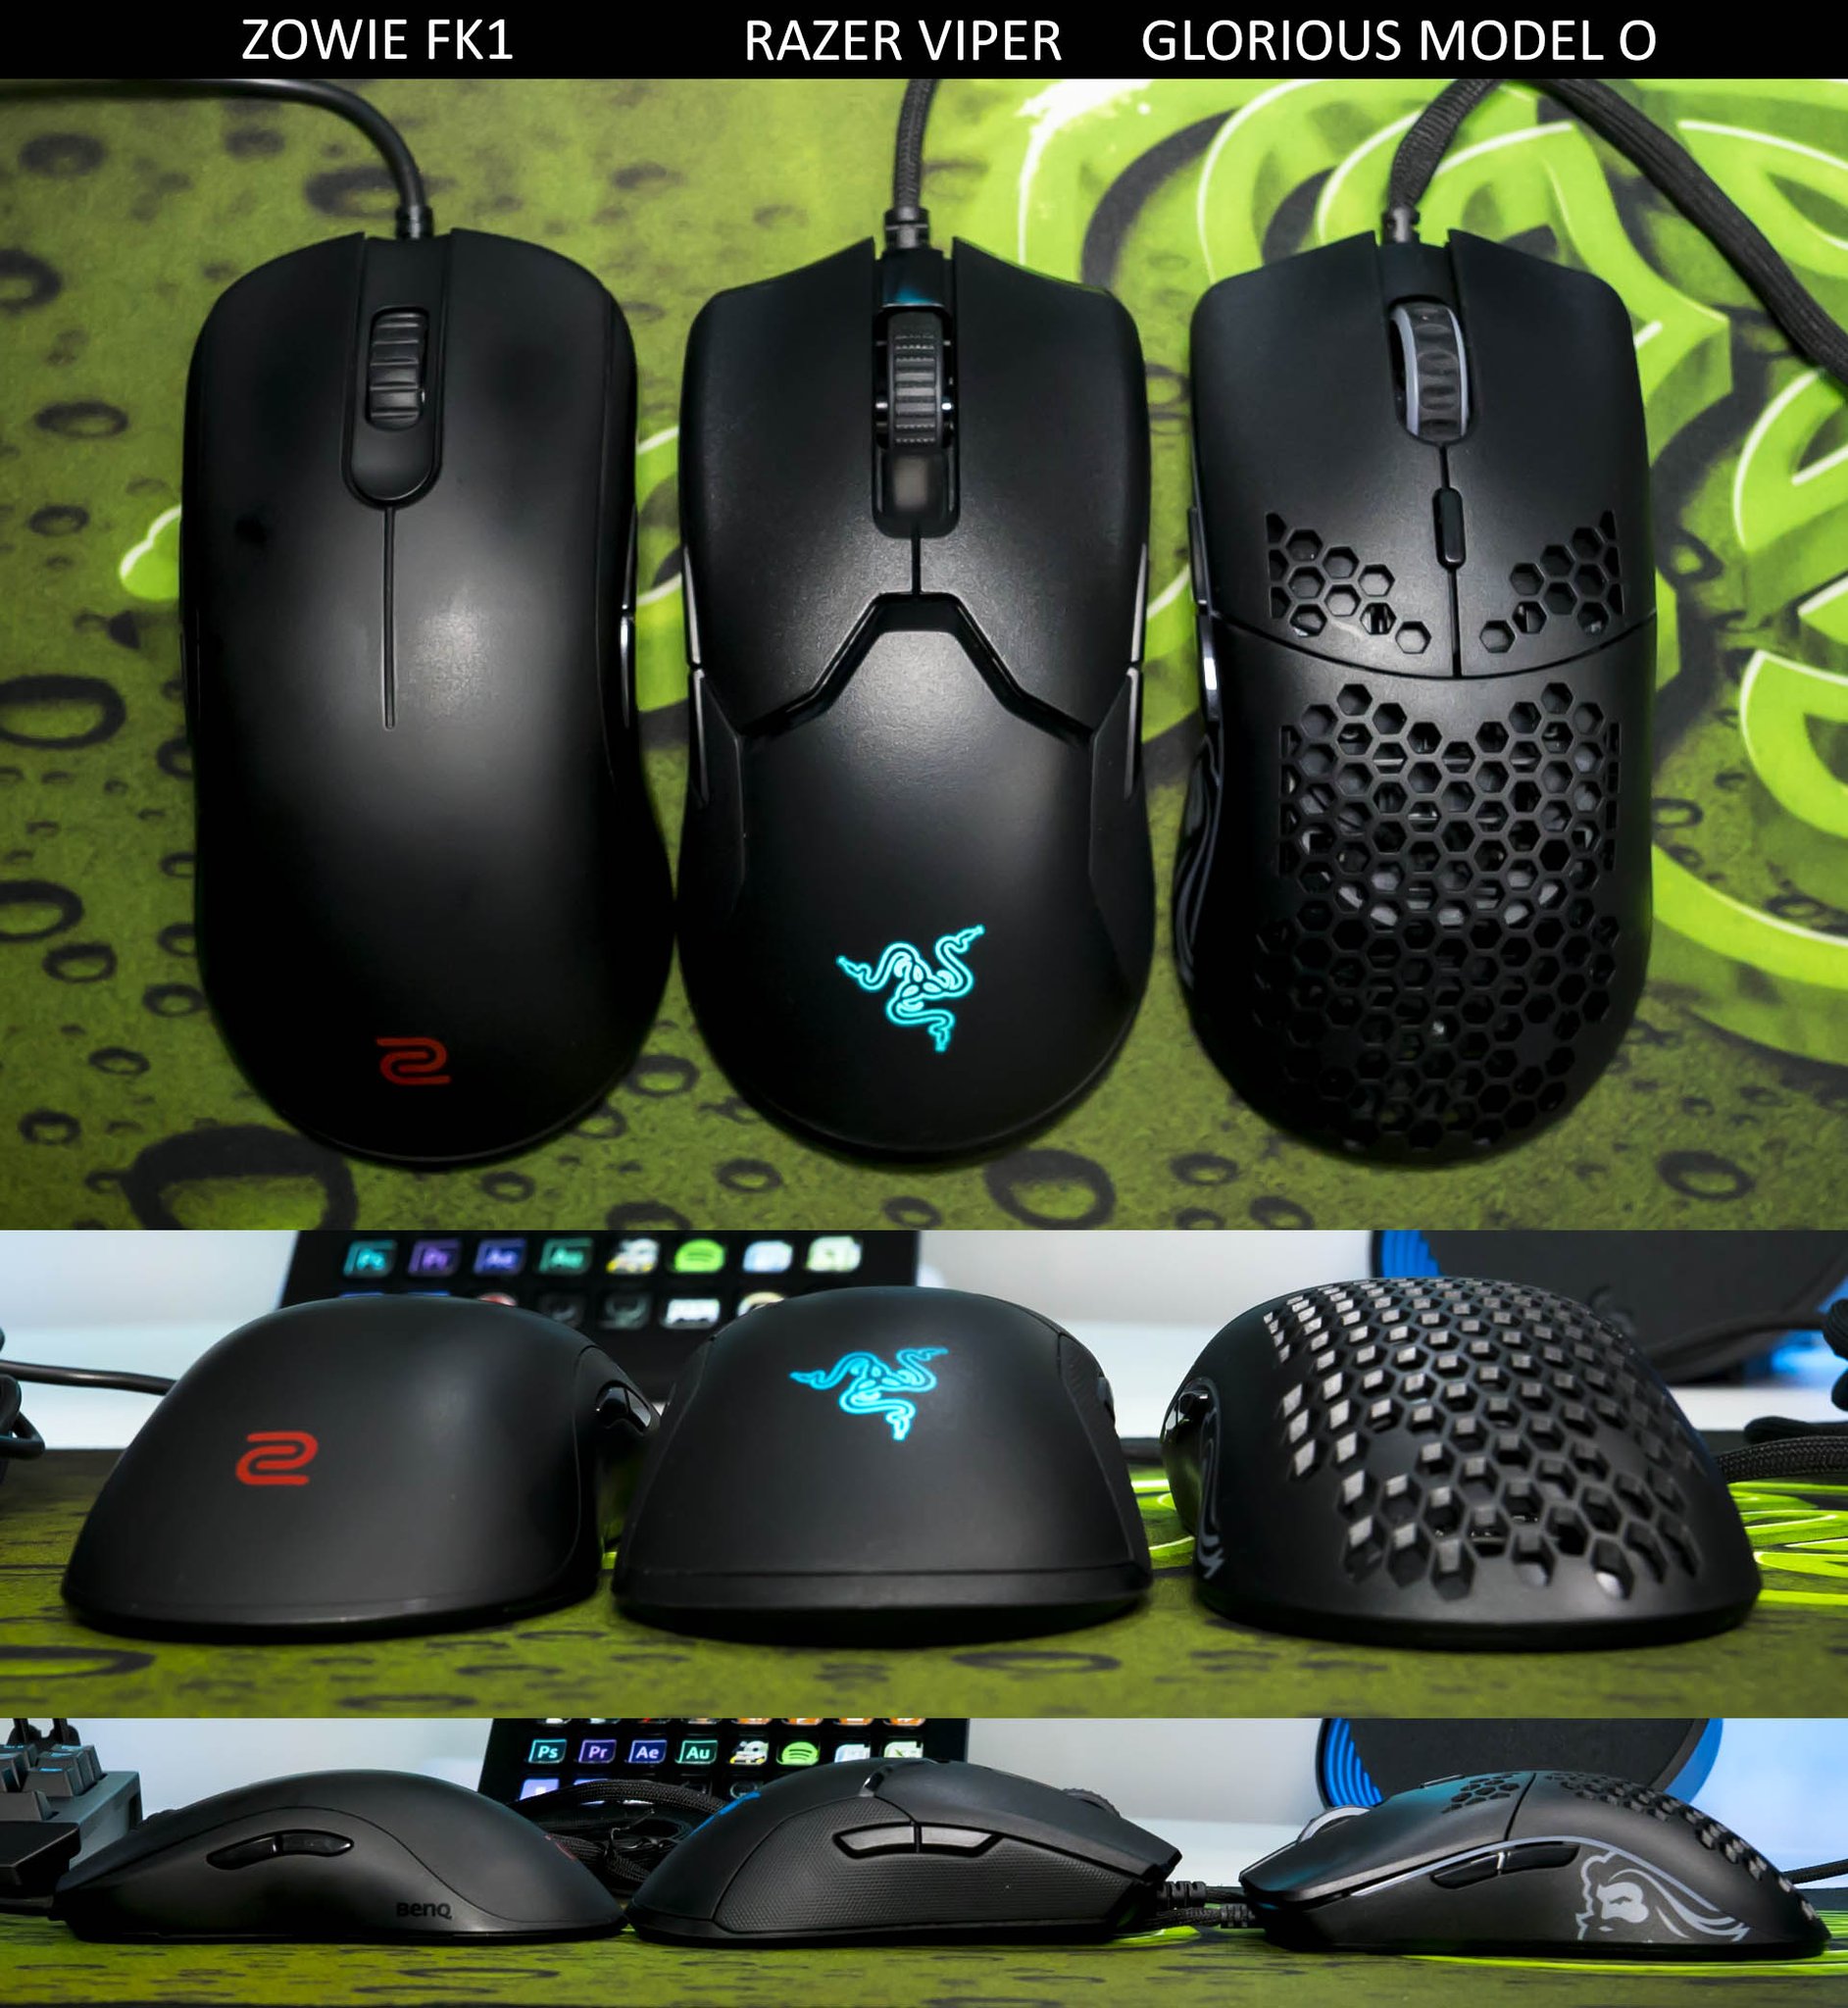 Rocket Jump Ninja The Zowiefk1 Vs Razerviper Vs Gloriousmodelo All Three Have Very Similar Shells Basically Same Size Too Thus The Cloning Comments The Viper Is The Top Pick